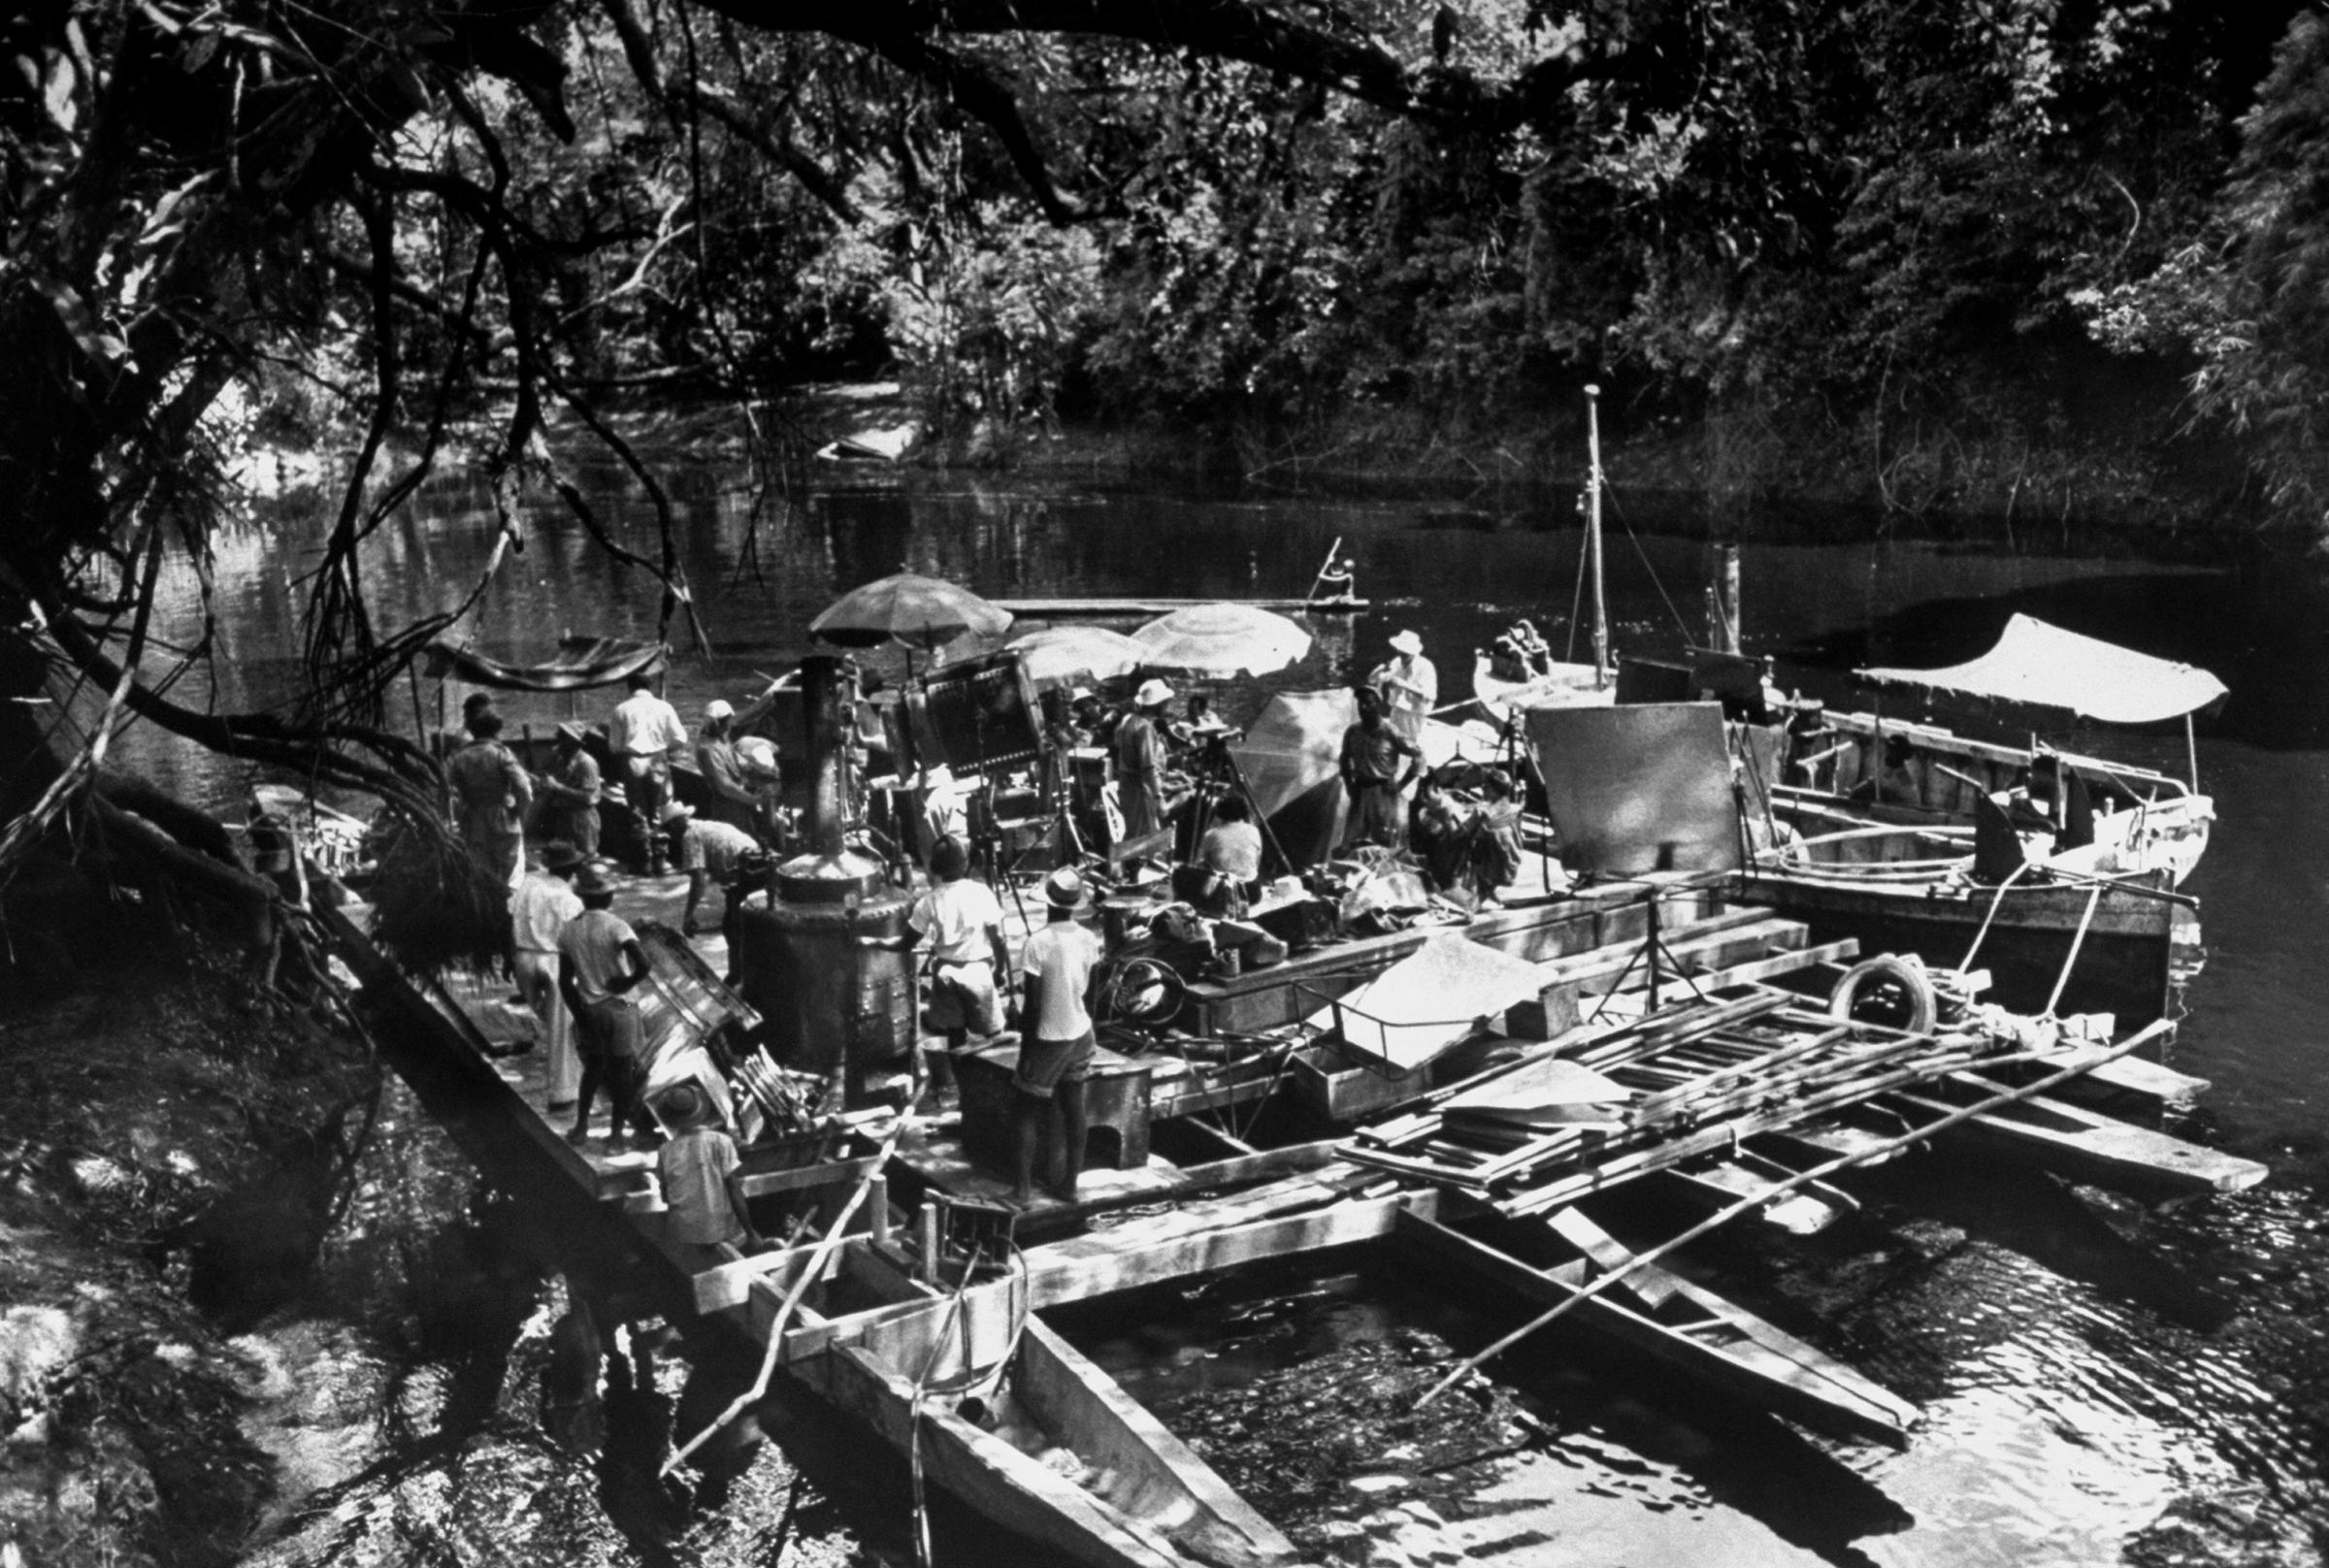 A view of the rig necessary to allow filming of Charlie Allnut's boat on the river in The African Queen.